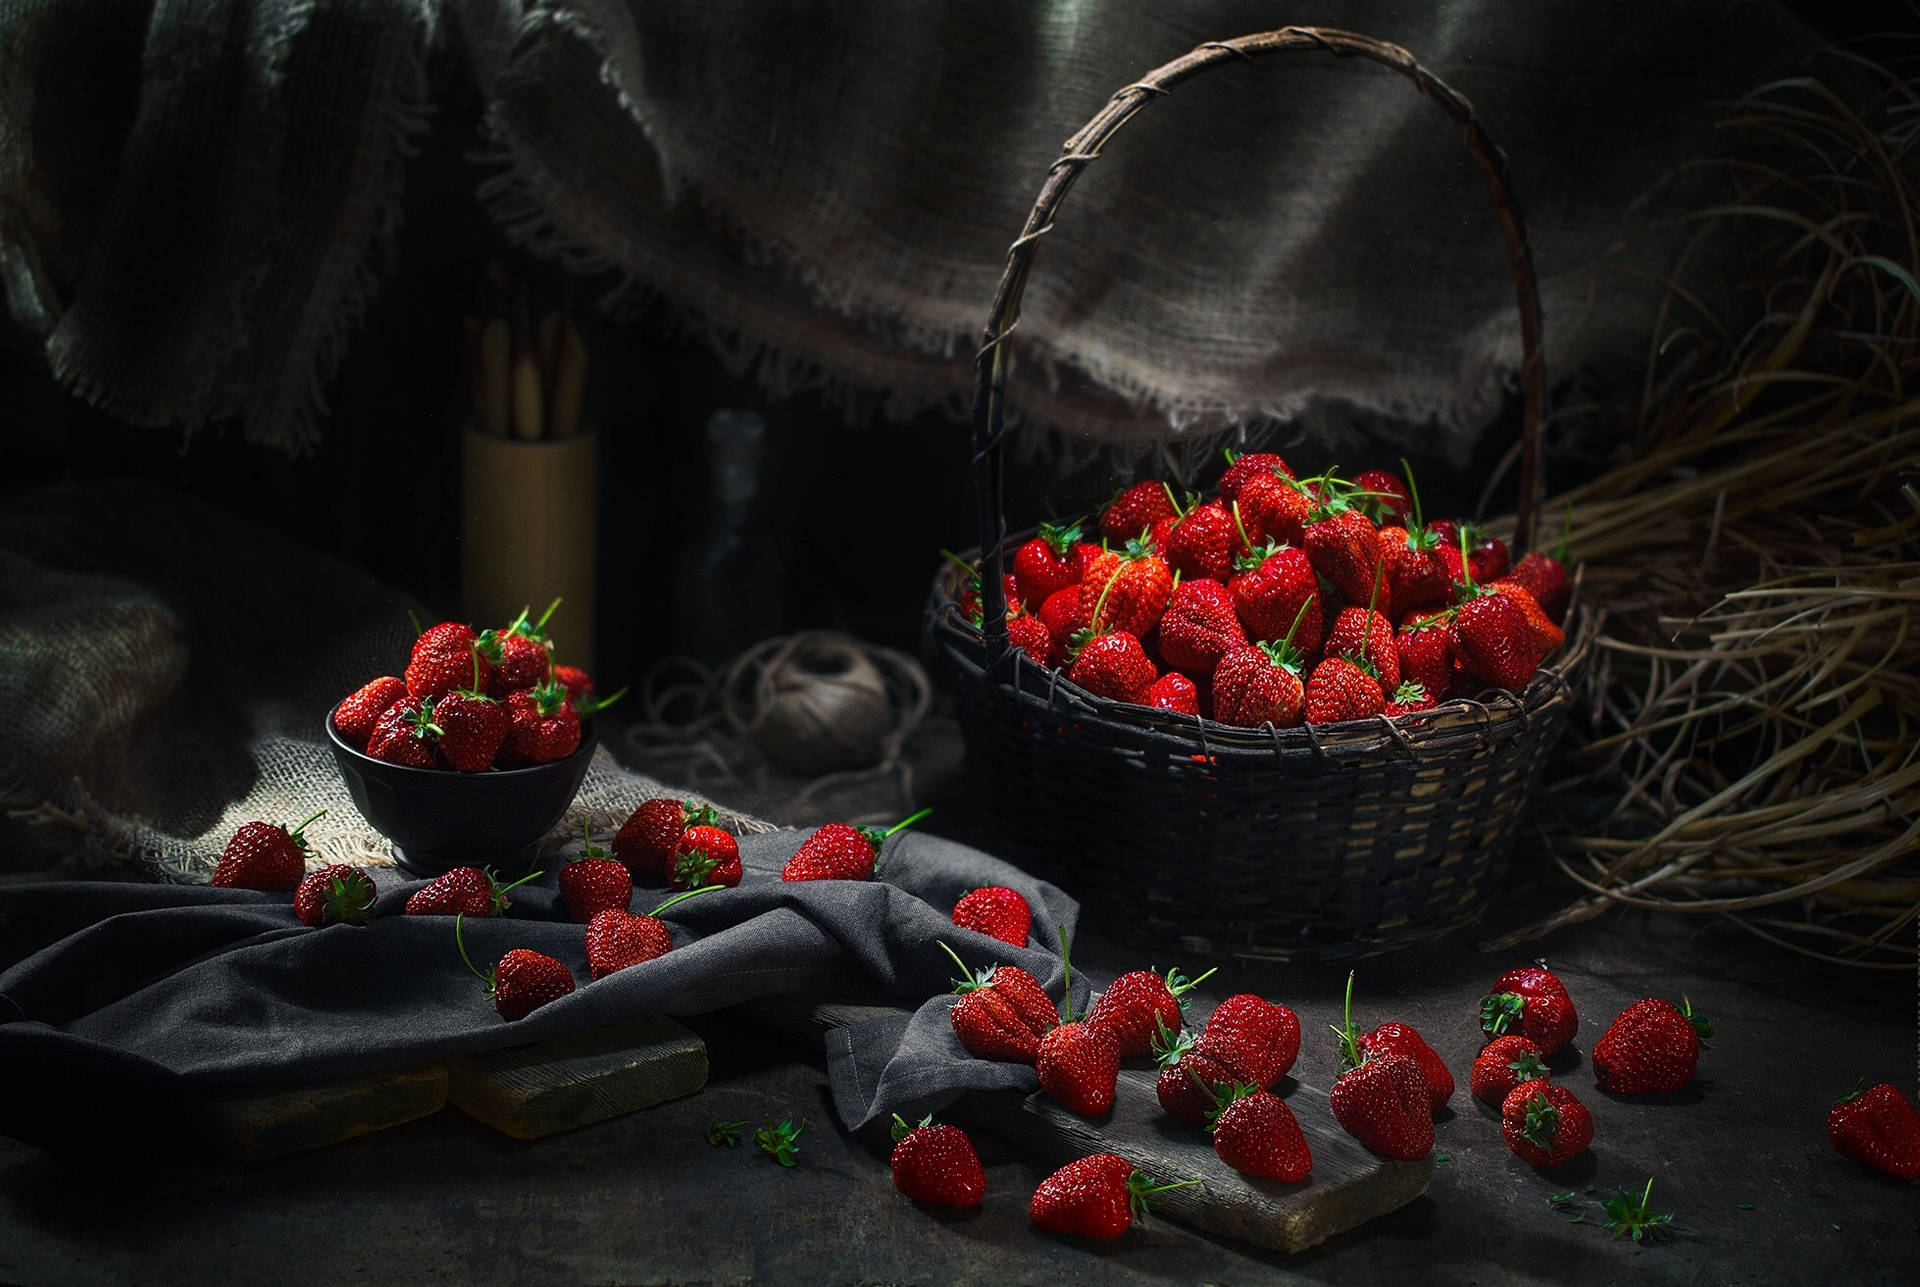 A Fresh Bunch Of Strawberries In Vintage Ambiance